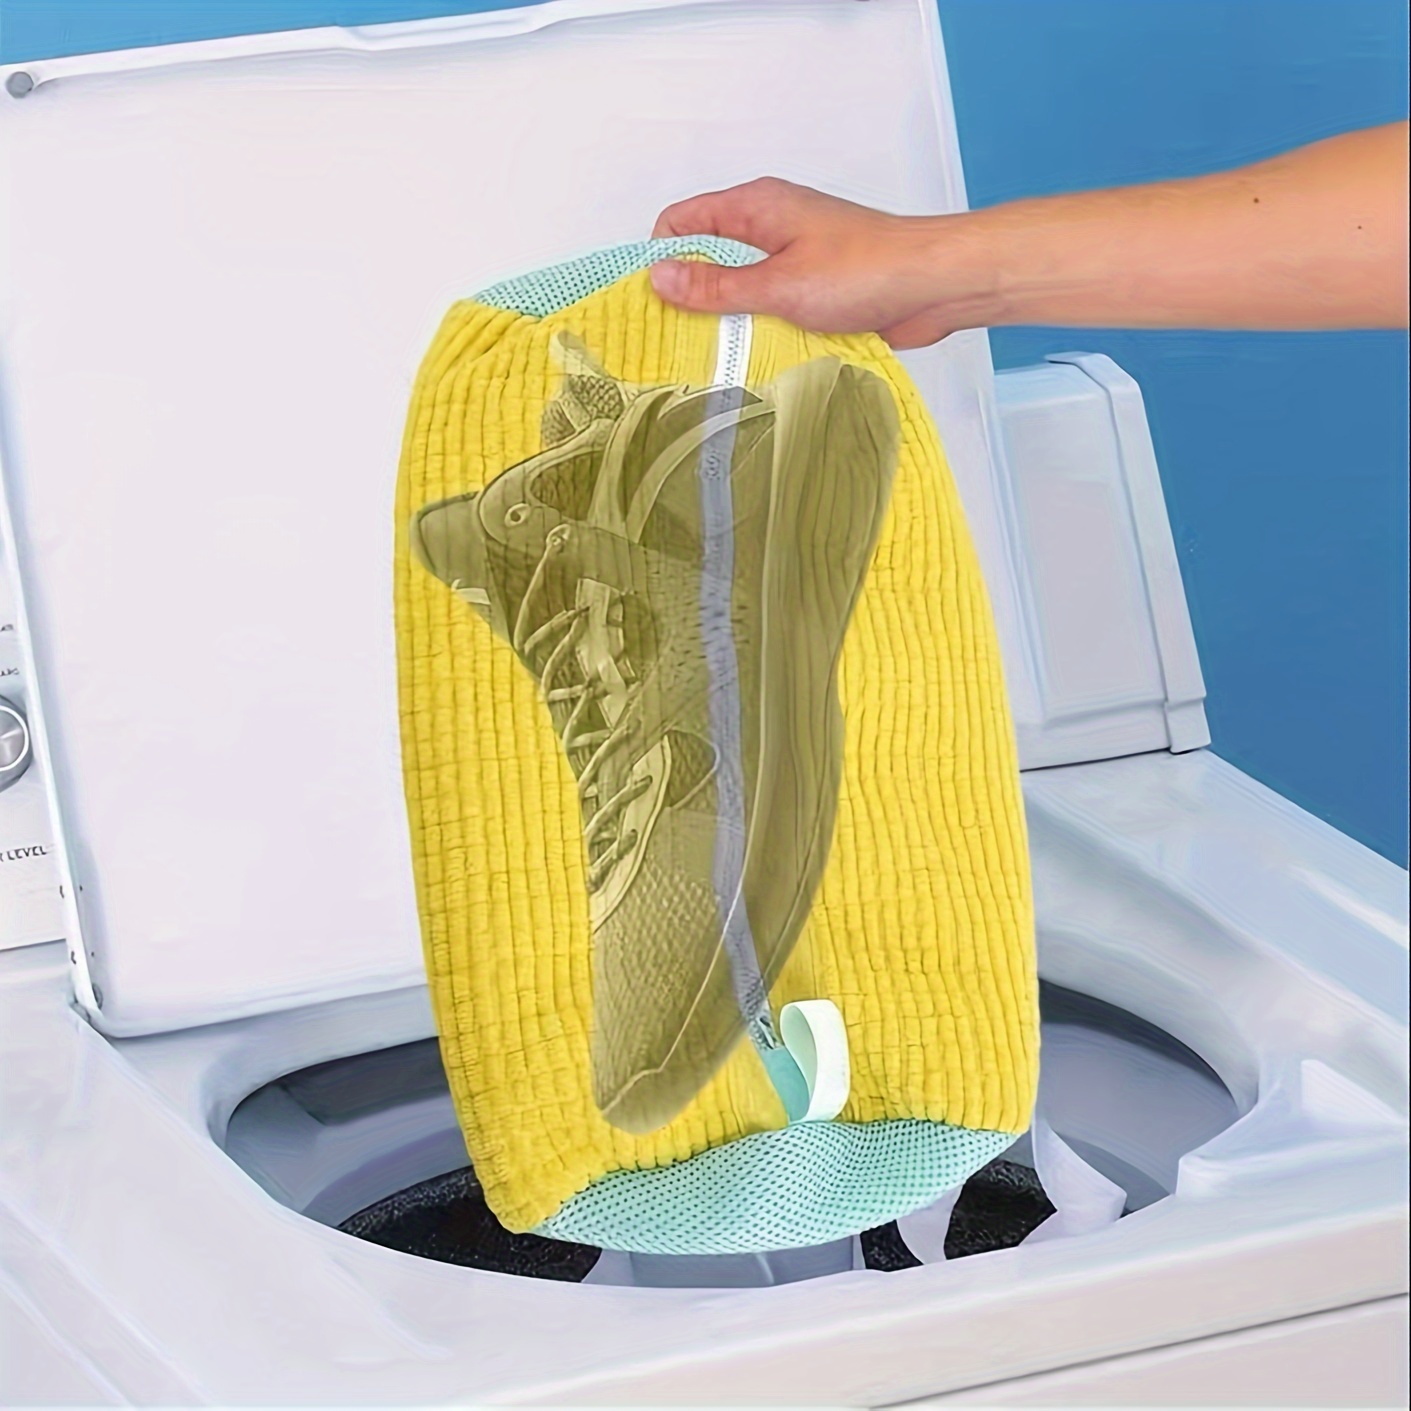 

Magic Shoe Wash Bag For Washing Machines - Anti-deformation, Protective Laundry Bag With Zipper Closure